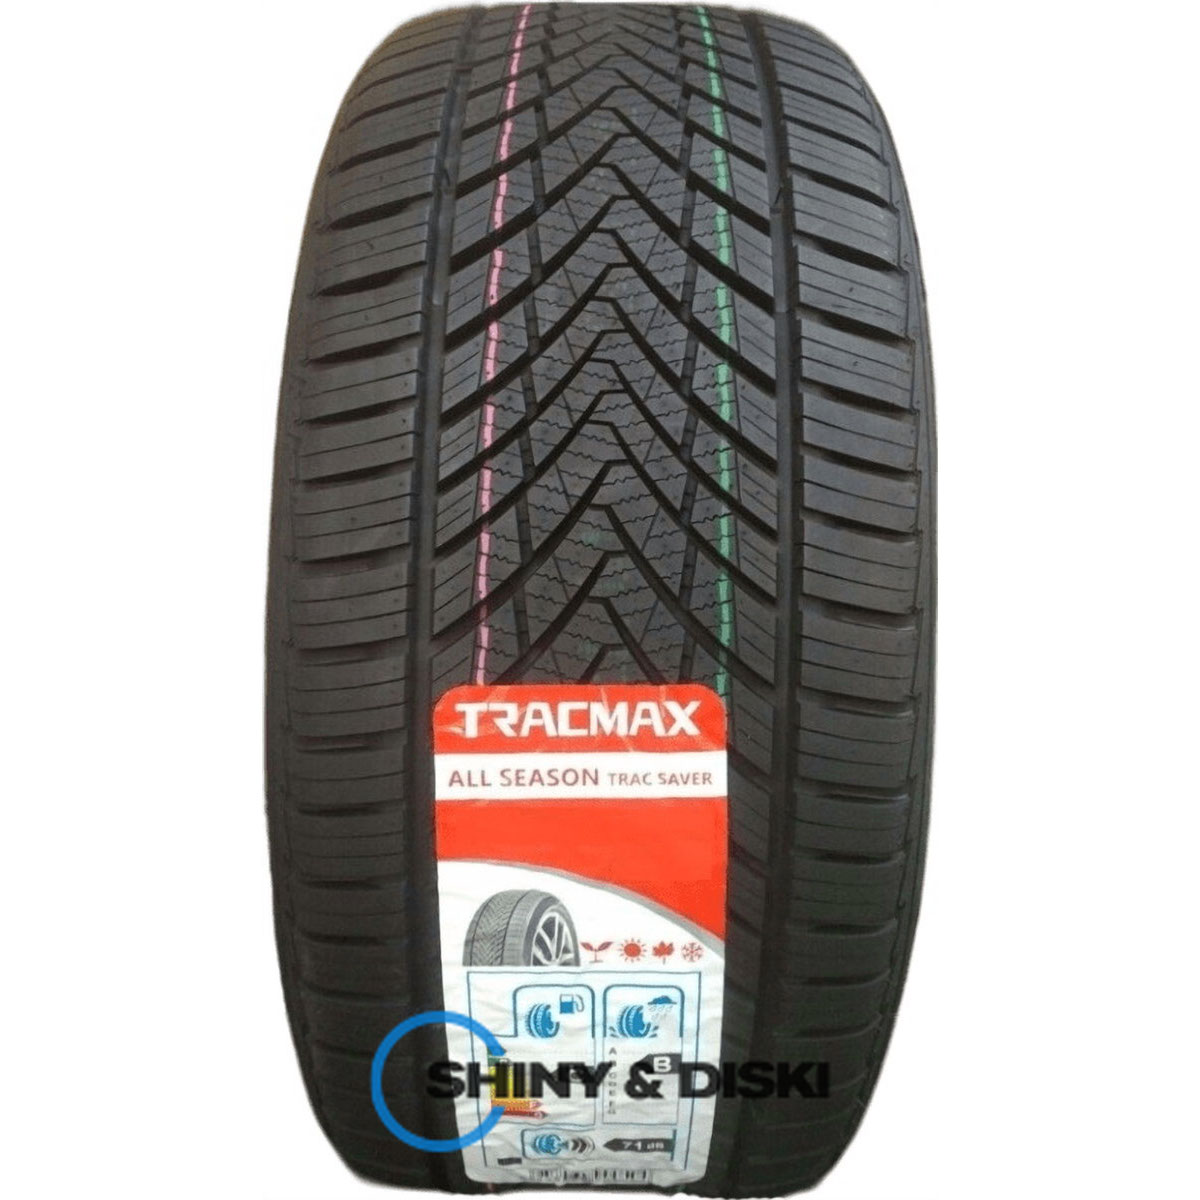 покрышки tracmax a/s trac saver 235/60 r16 100v